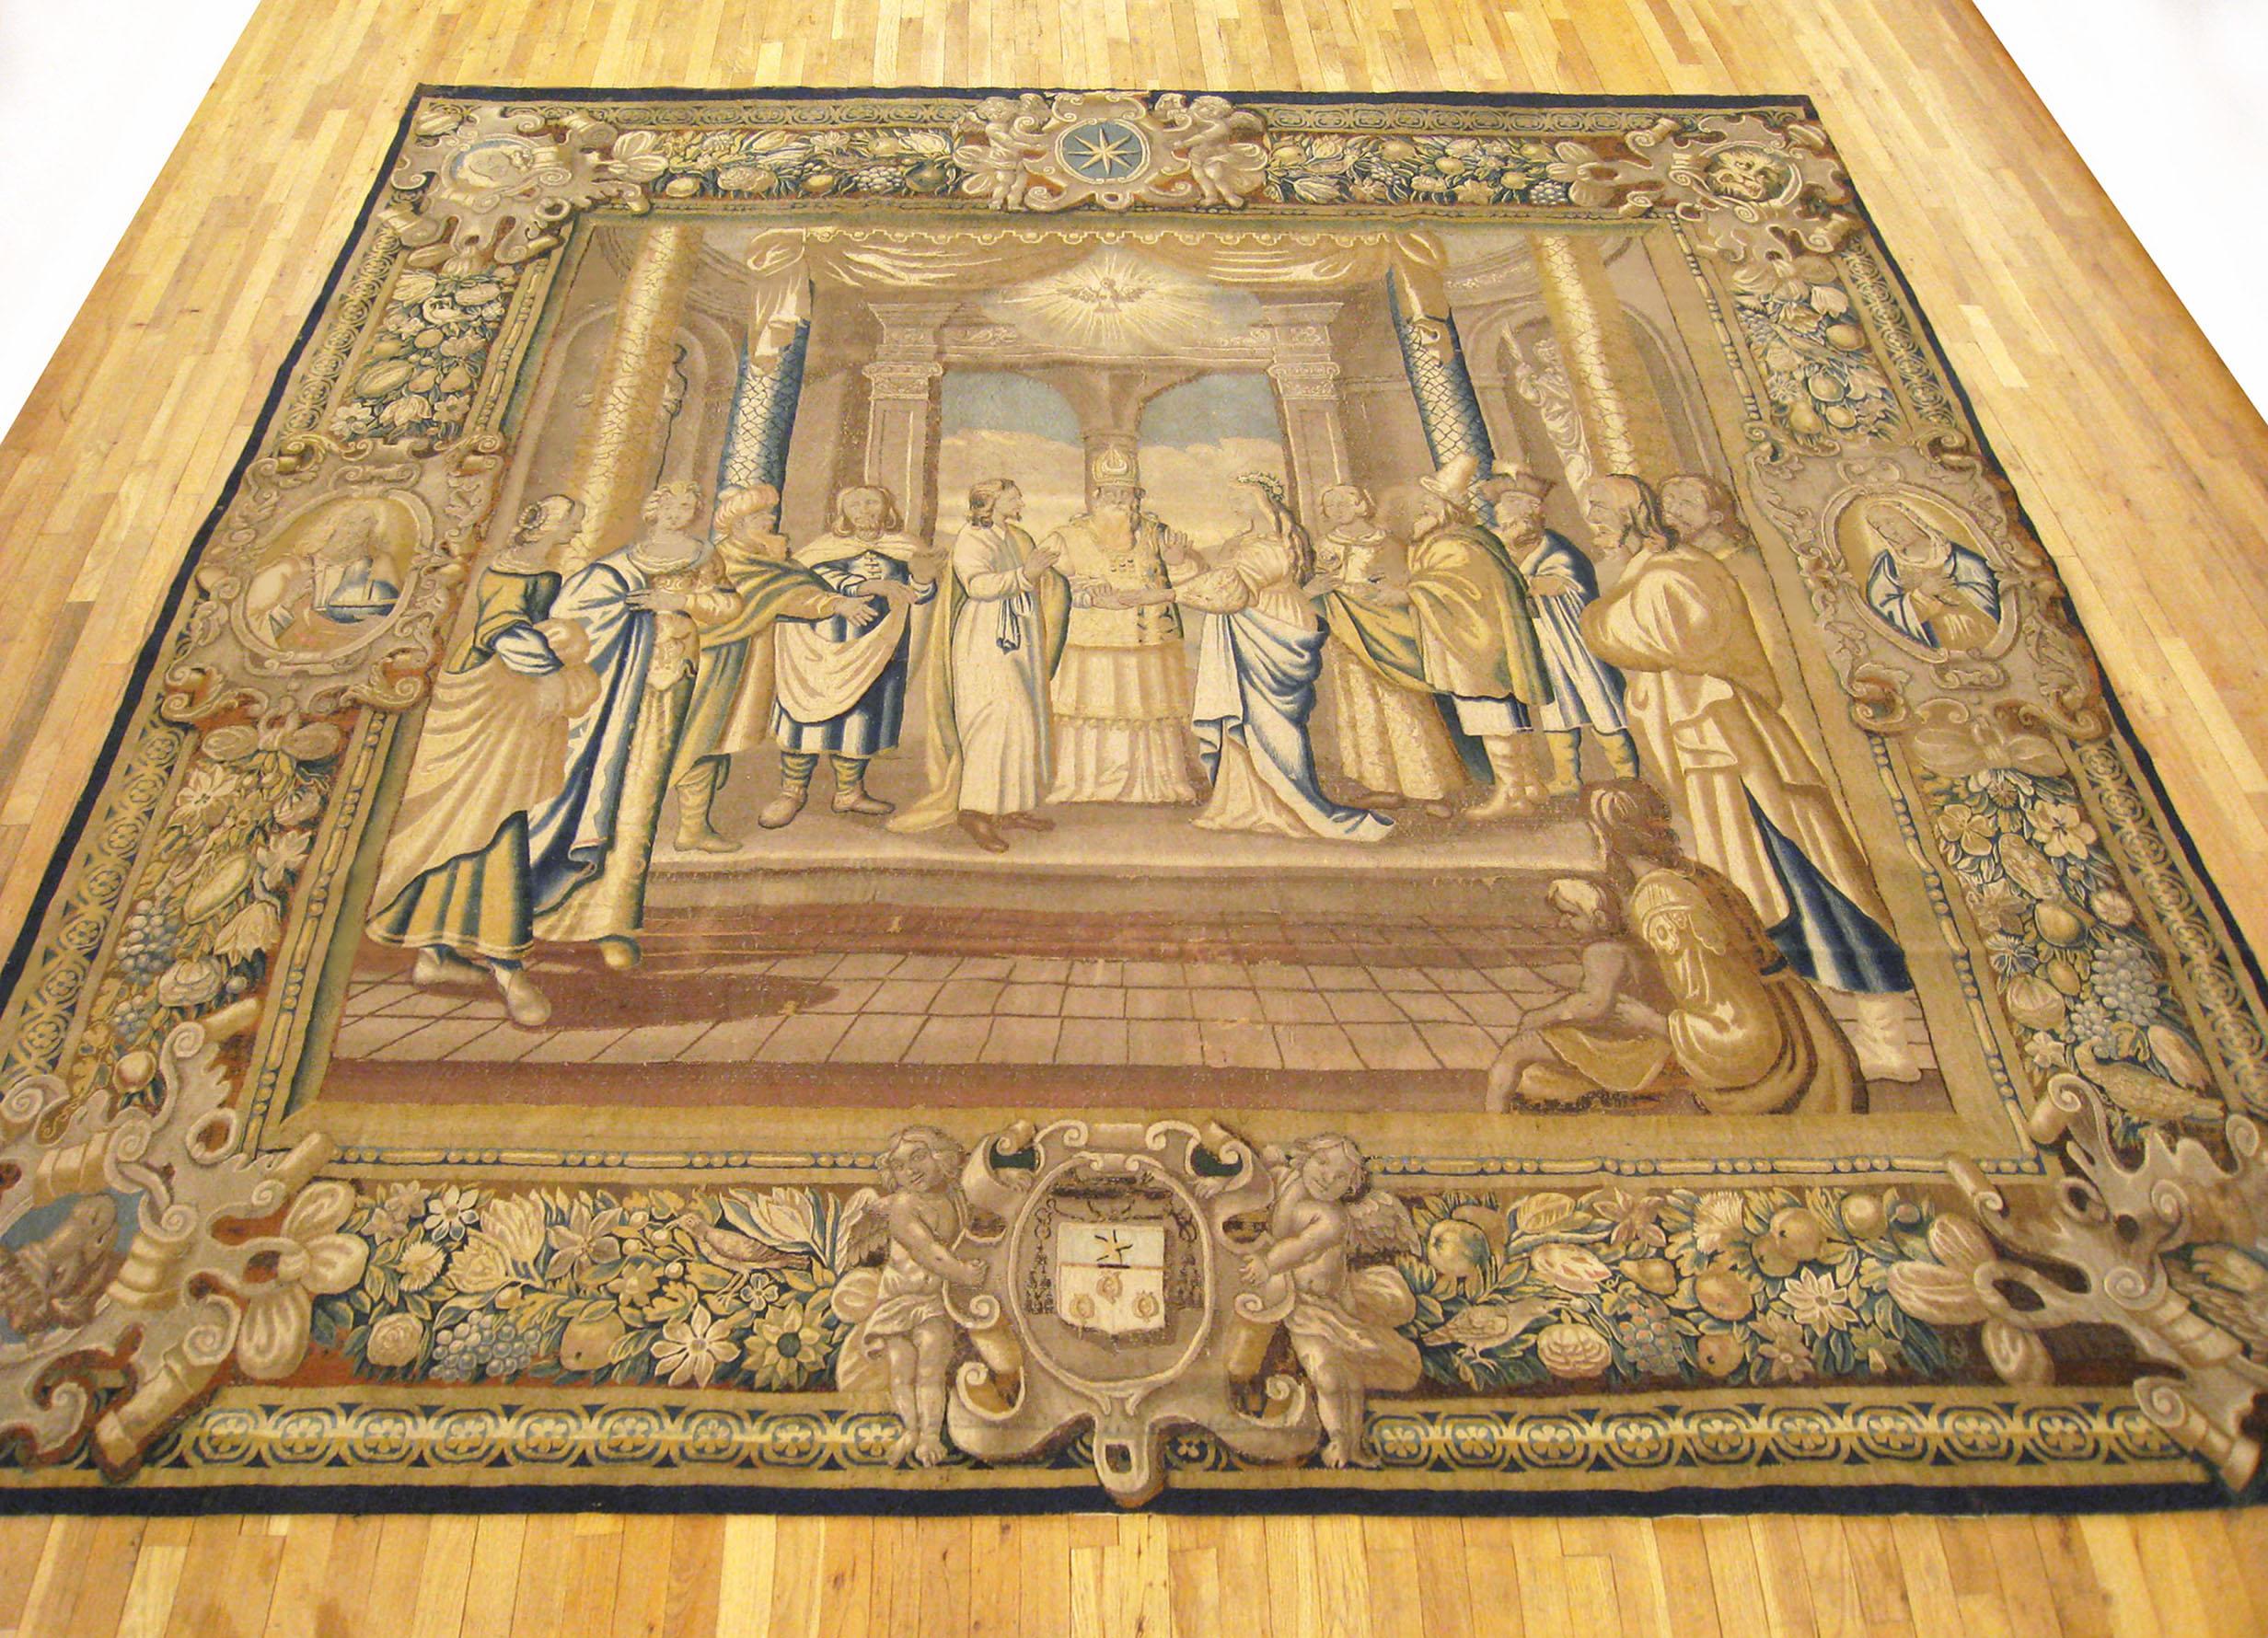 A French religious tapestry from Paris, circa 17th century, size 11' H x 11' W. This magnificent handwoven wool and silk wall hanging envisions the marriage of the New Testament figures, Mary and Joseph, with the High Priest flanked by Mary and